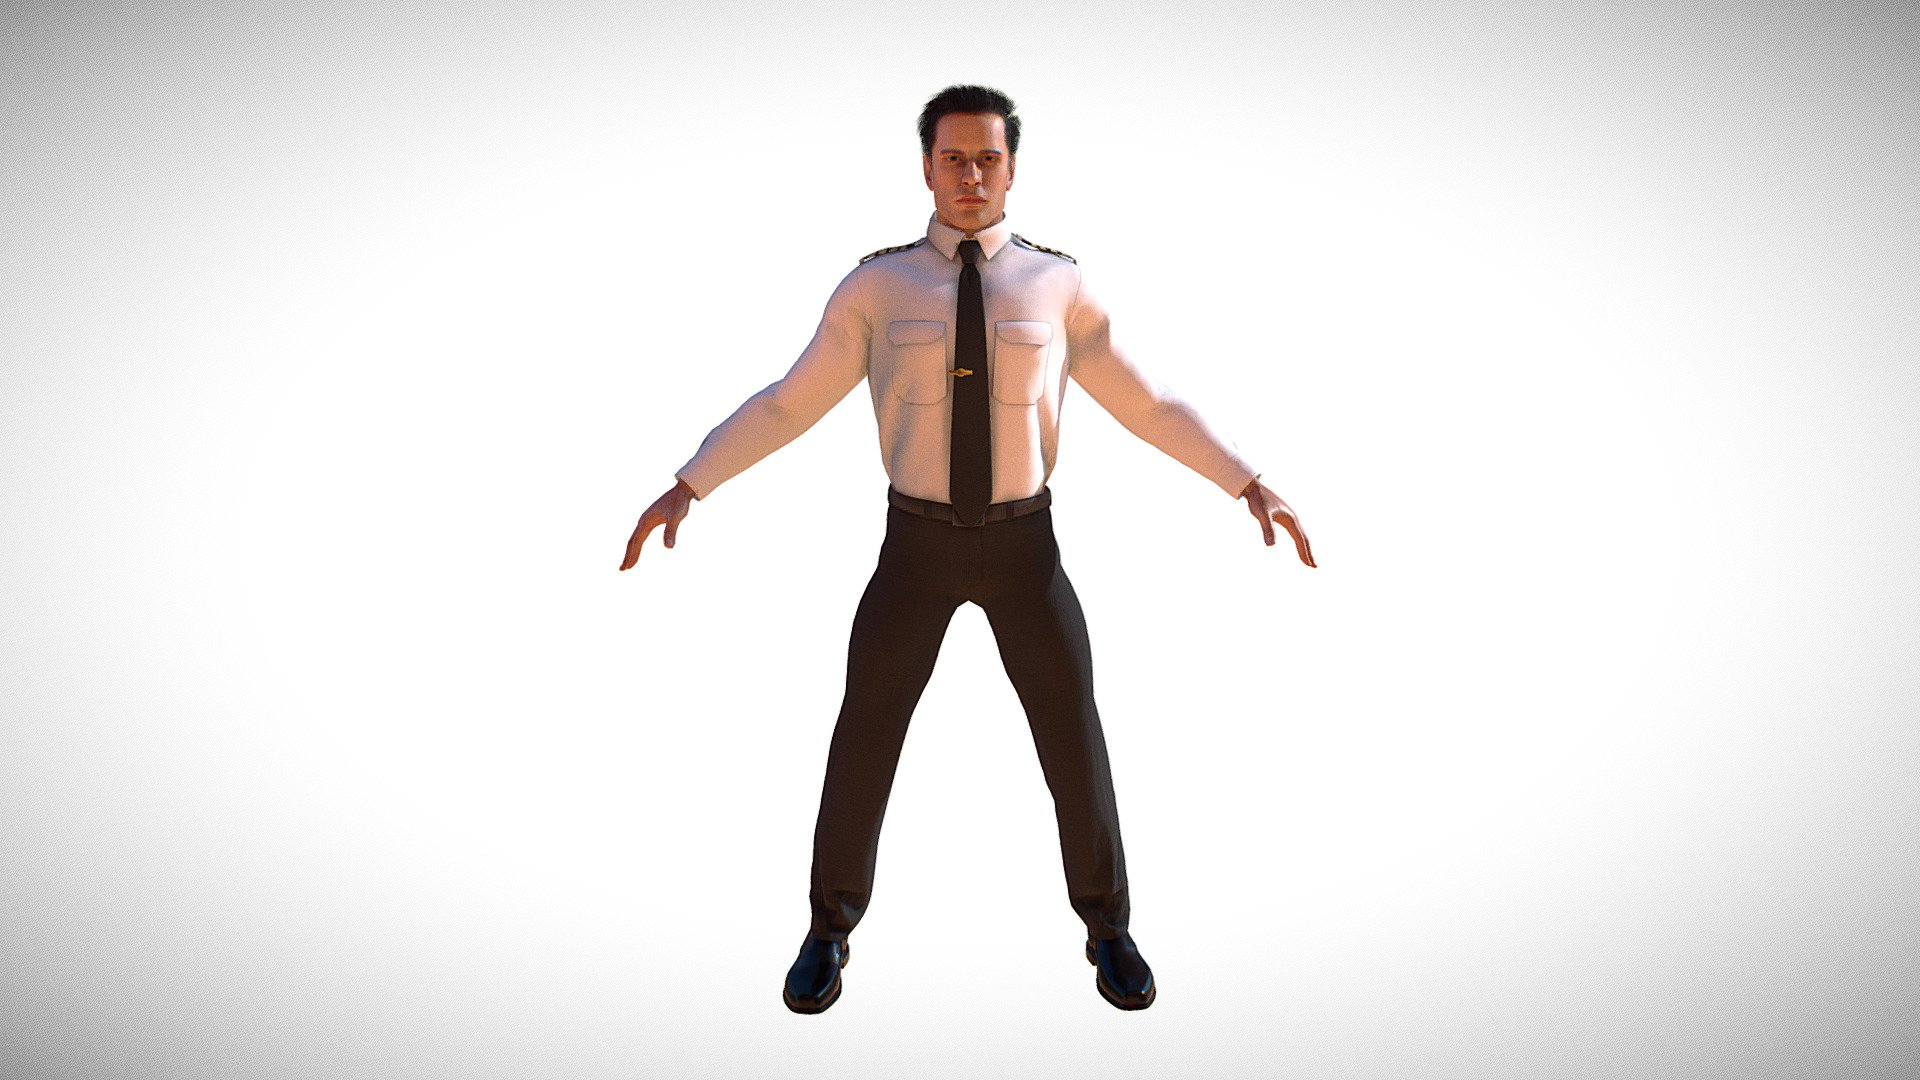 A custom made realistic 3D Airline Pilot Captain Model rigged for UE4 Mannequin wich is usable in both UE4 and UE5.

Please keep in mind this model is still in development and does not show the final result - [UE4] Airline Pilot Captain (Male) - 3D model by SanForge Studio (@SanForge) 3d model